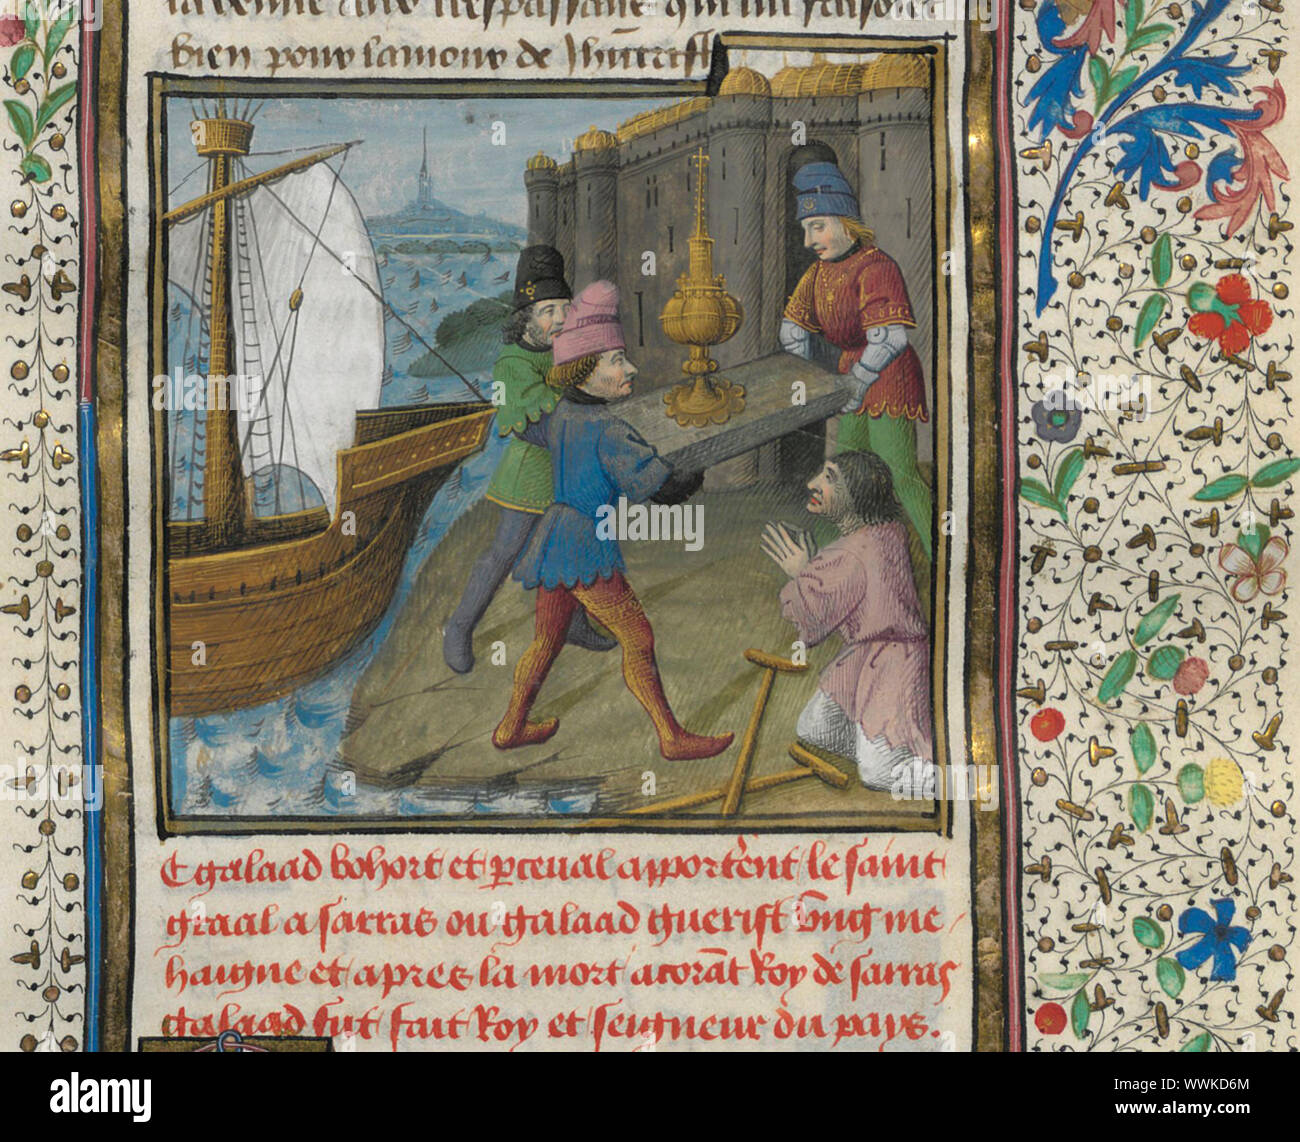 The three Grail Knights brings the Holy Grail to the Ship of Solomon. From: Lancelot en prose, 15th century. Found in the Collection of Biblioth&#xe8;que Nationale de France. Stock Photo